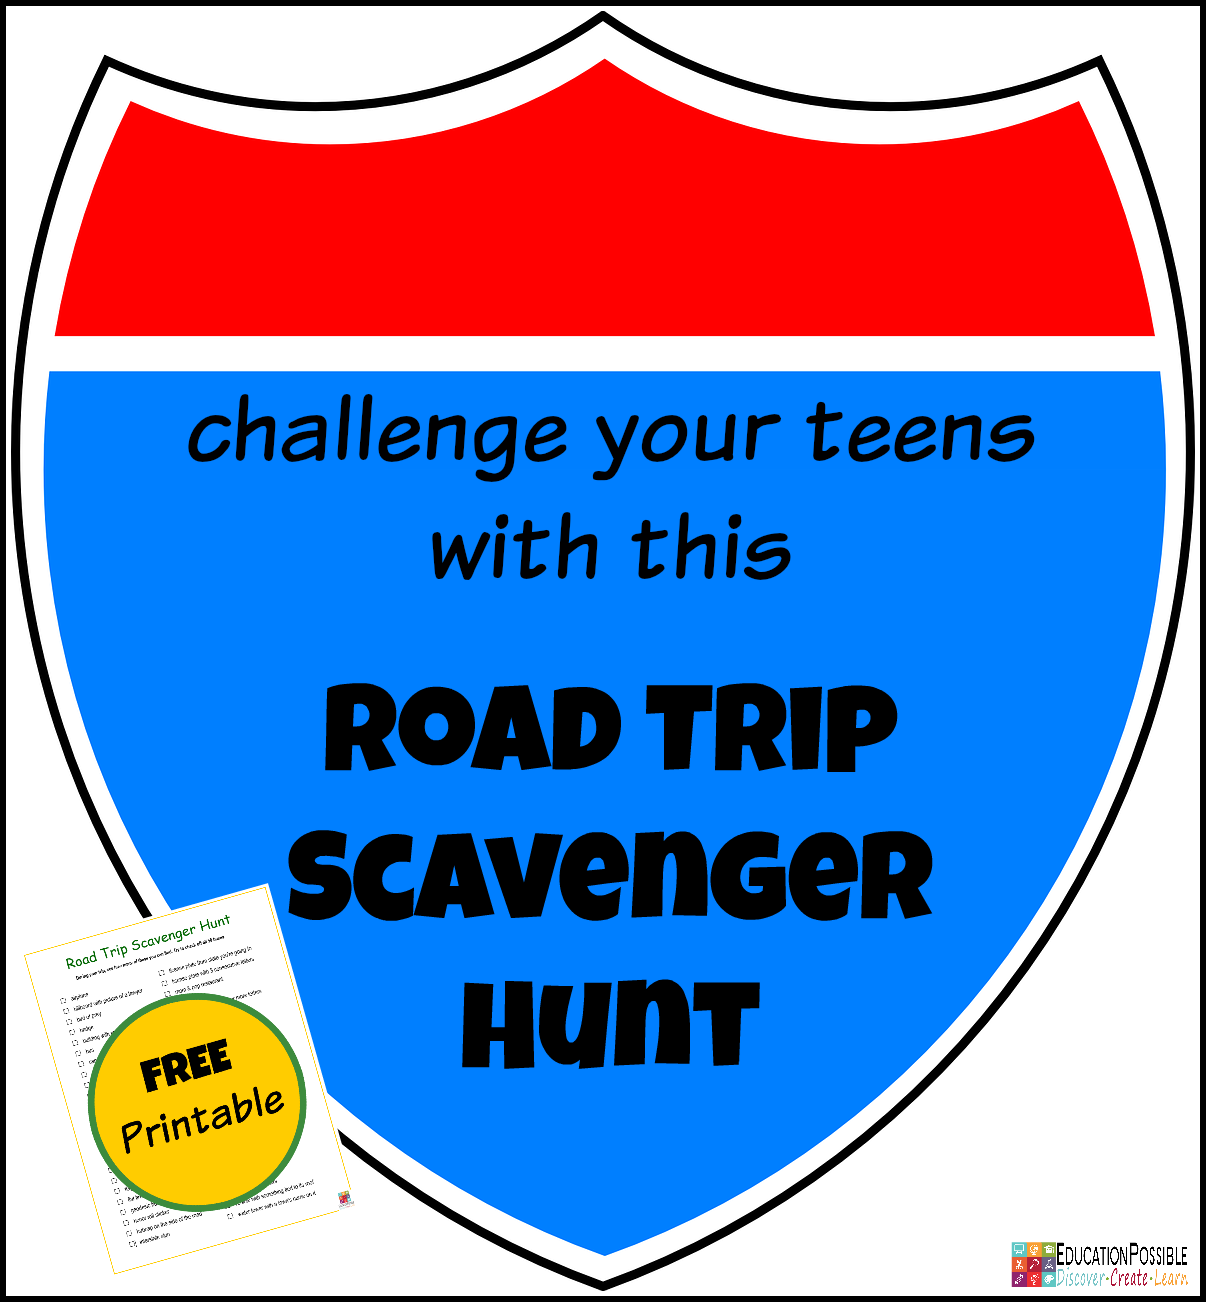 Challenge-your-Teens-with-a-Road-Trip-Scavenger-Hunt-@EducationPossible